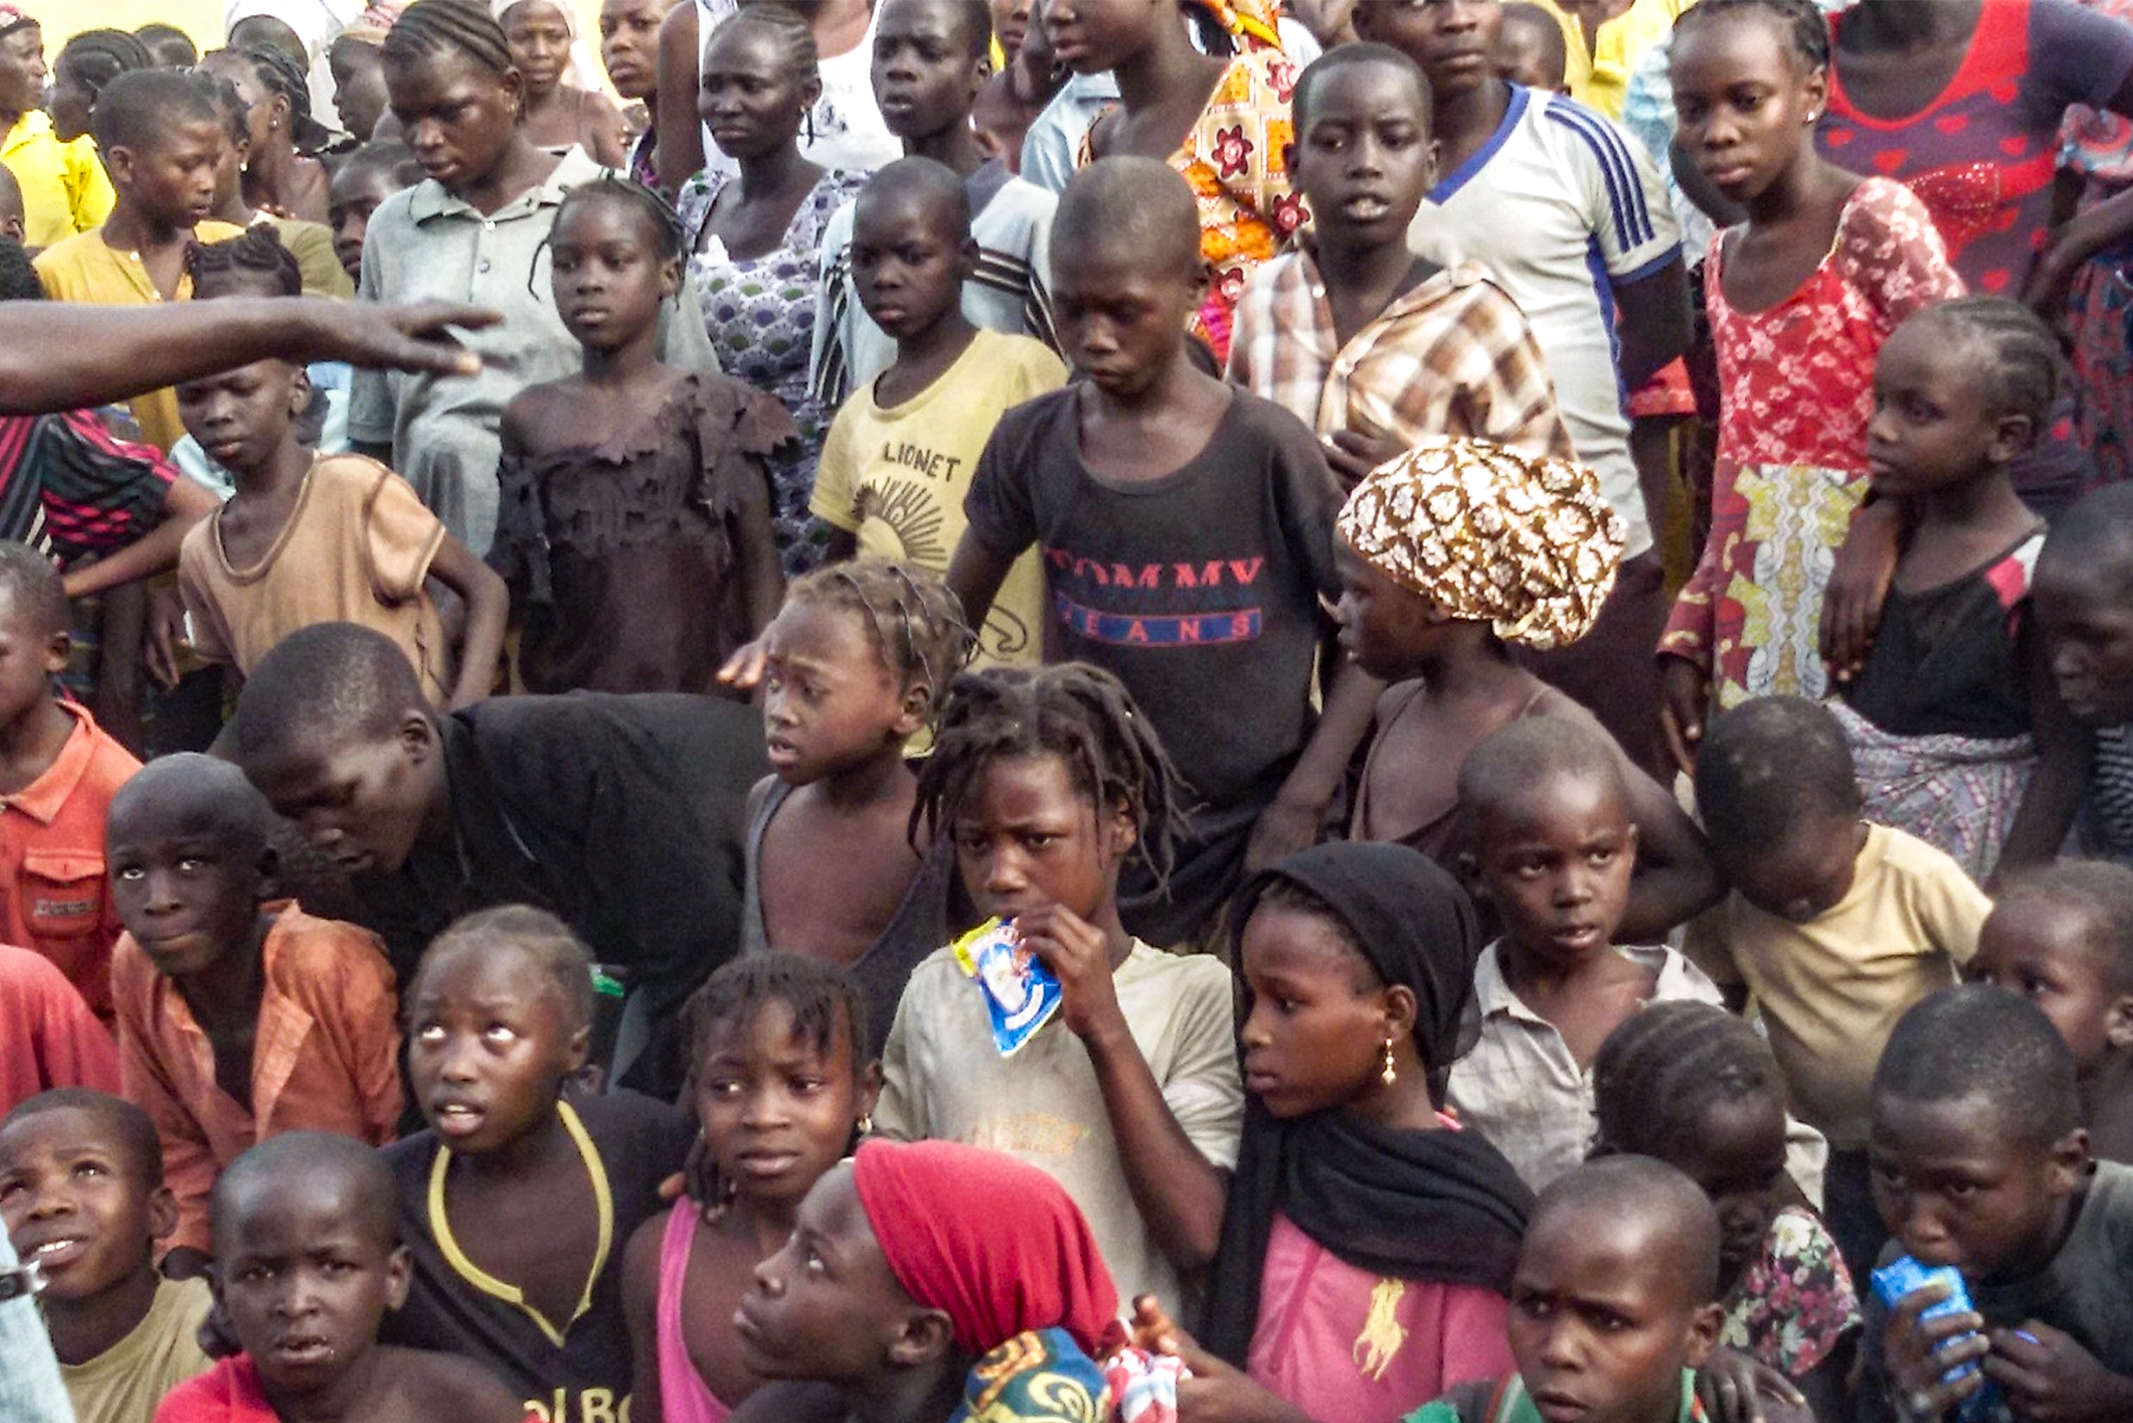 Nigerian children crowded together for an event